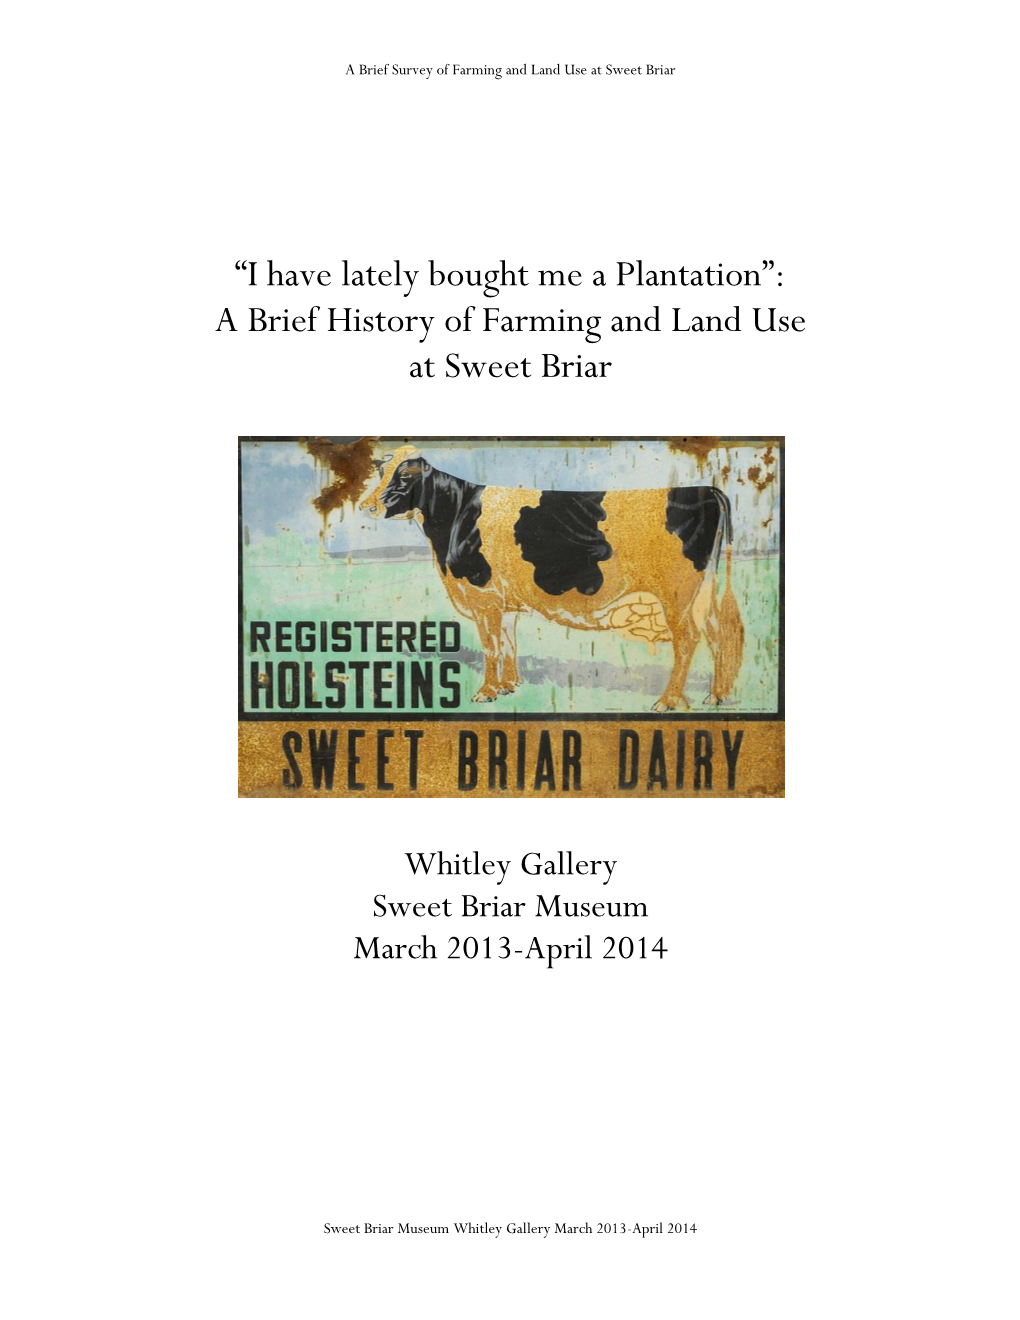 “I Have Lately Bought Me a Plantation”: a Brief History of Farming and Land Use at Sweet Briar